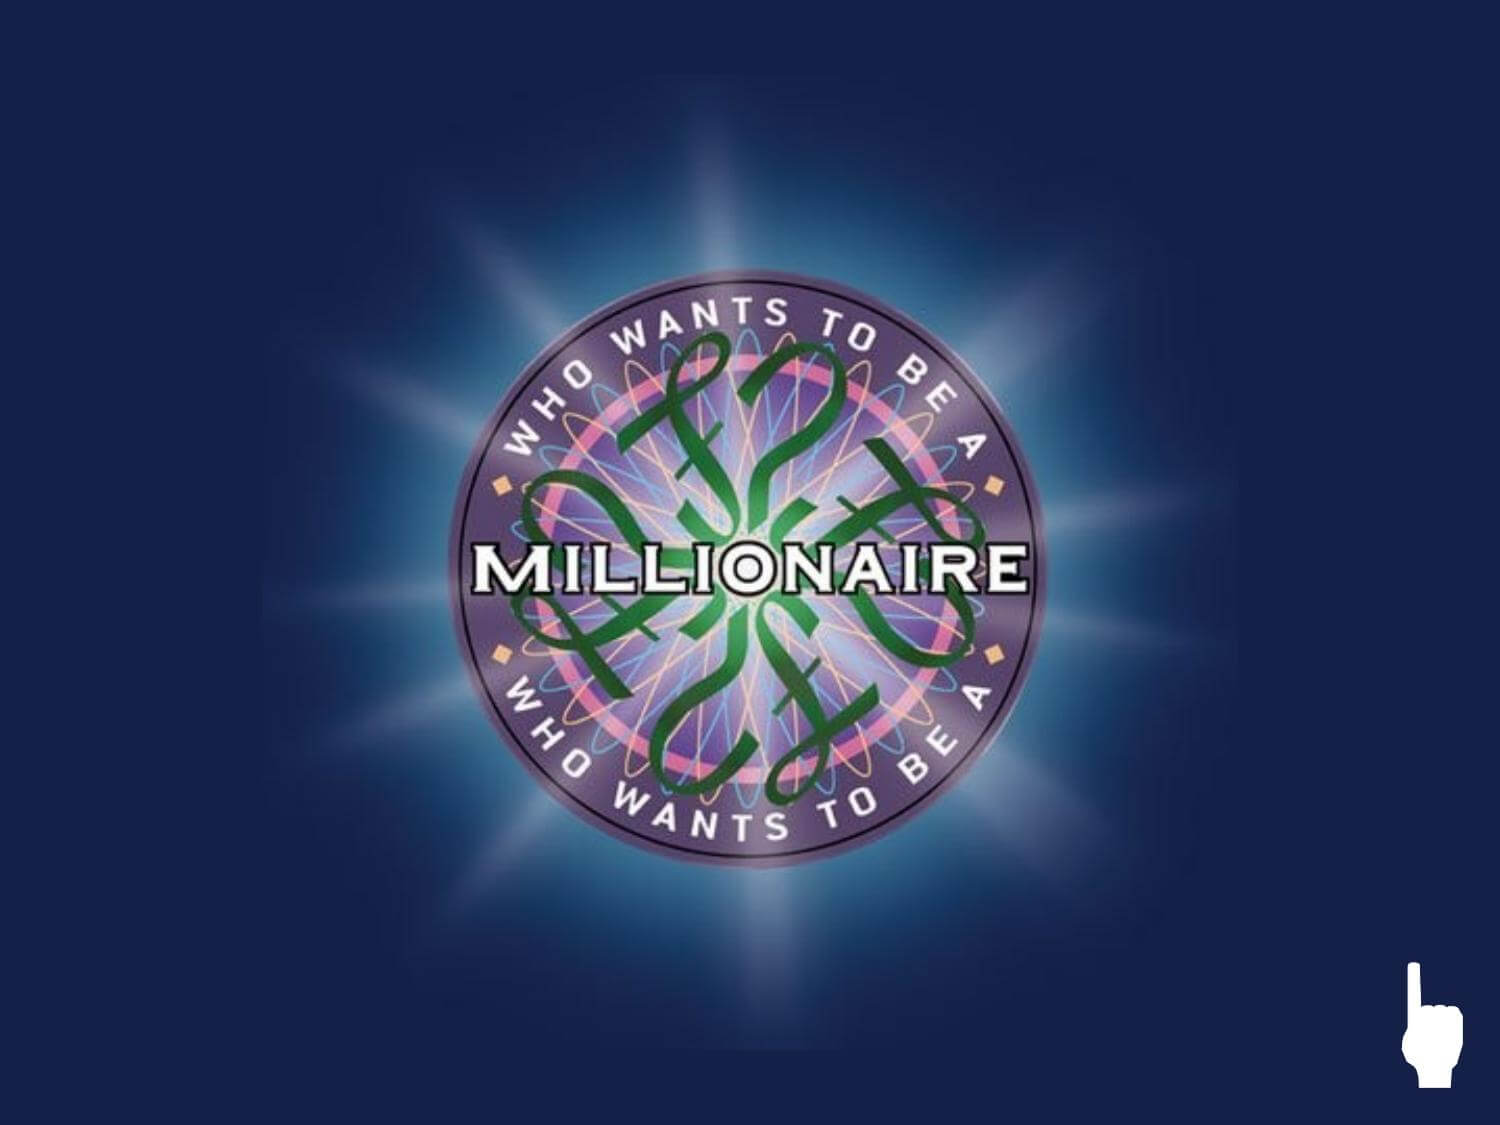 Who Wants To Be A Millionaire Powerpointdanielpanam – Issuu Intended For Who Wants To Be A Millionaire Powerpoint Template